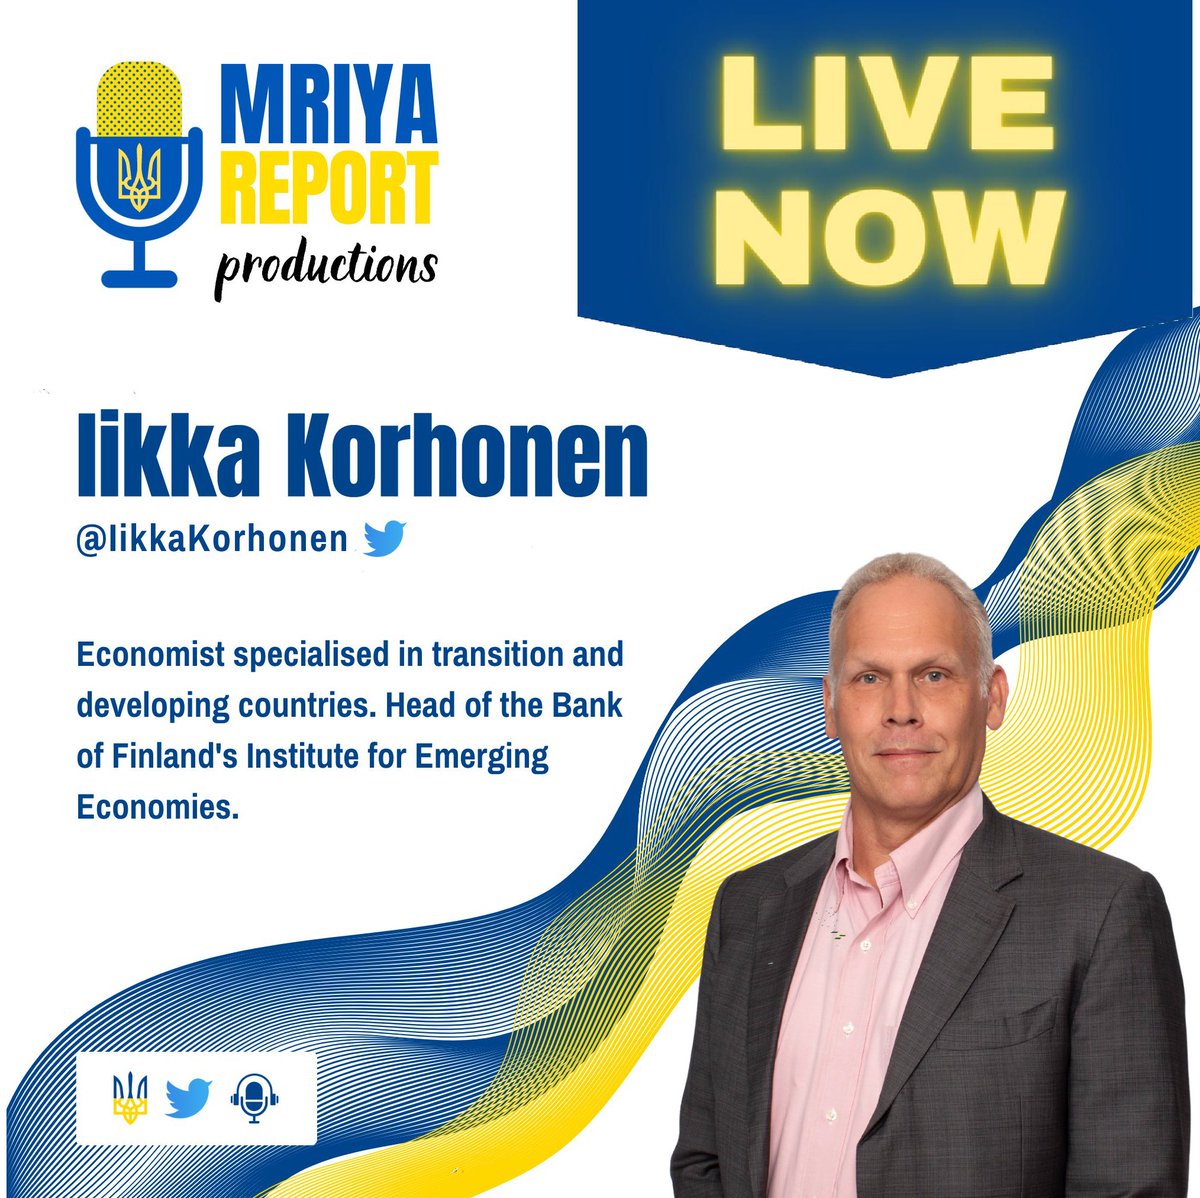 @MriyaReport special guest is here now
Let's find out the truth about the russian economy
#RunOnRussianBanks
How does it help 🇺🇦
What's happening with sanctions 
Come & ask a question
@domenpresern @BalticSnowTiger
@inversefox @ioanaV_
@LatinMilitaryAv
twitter.com/i/spaces/1zqKV…